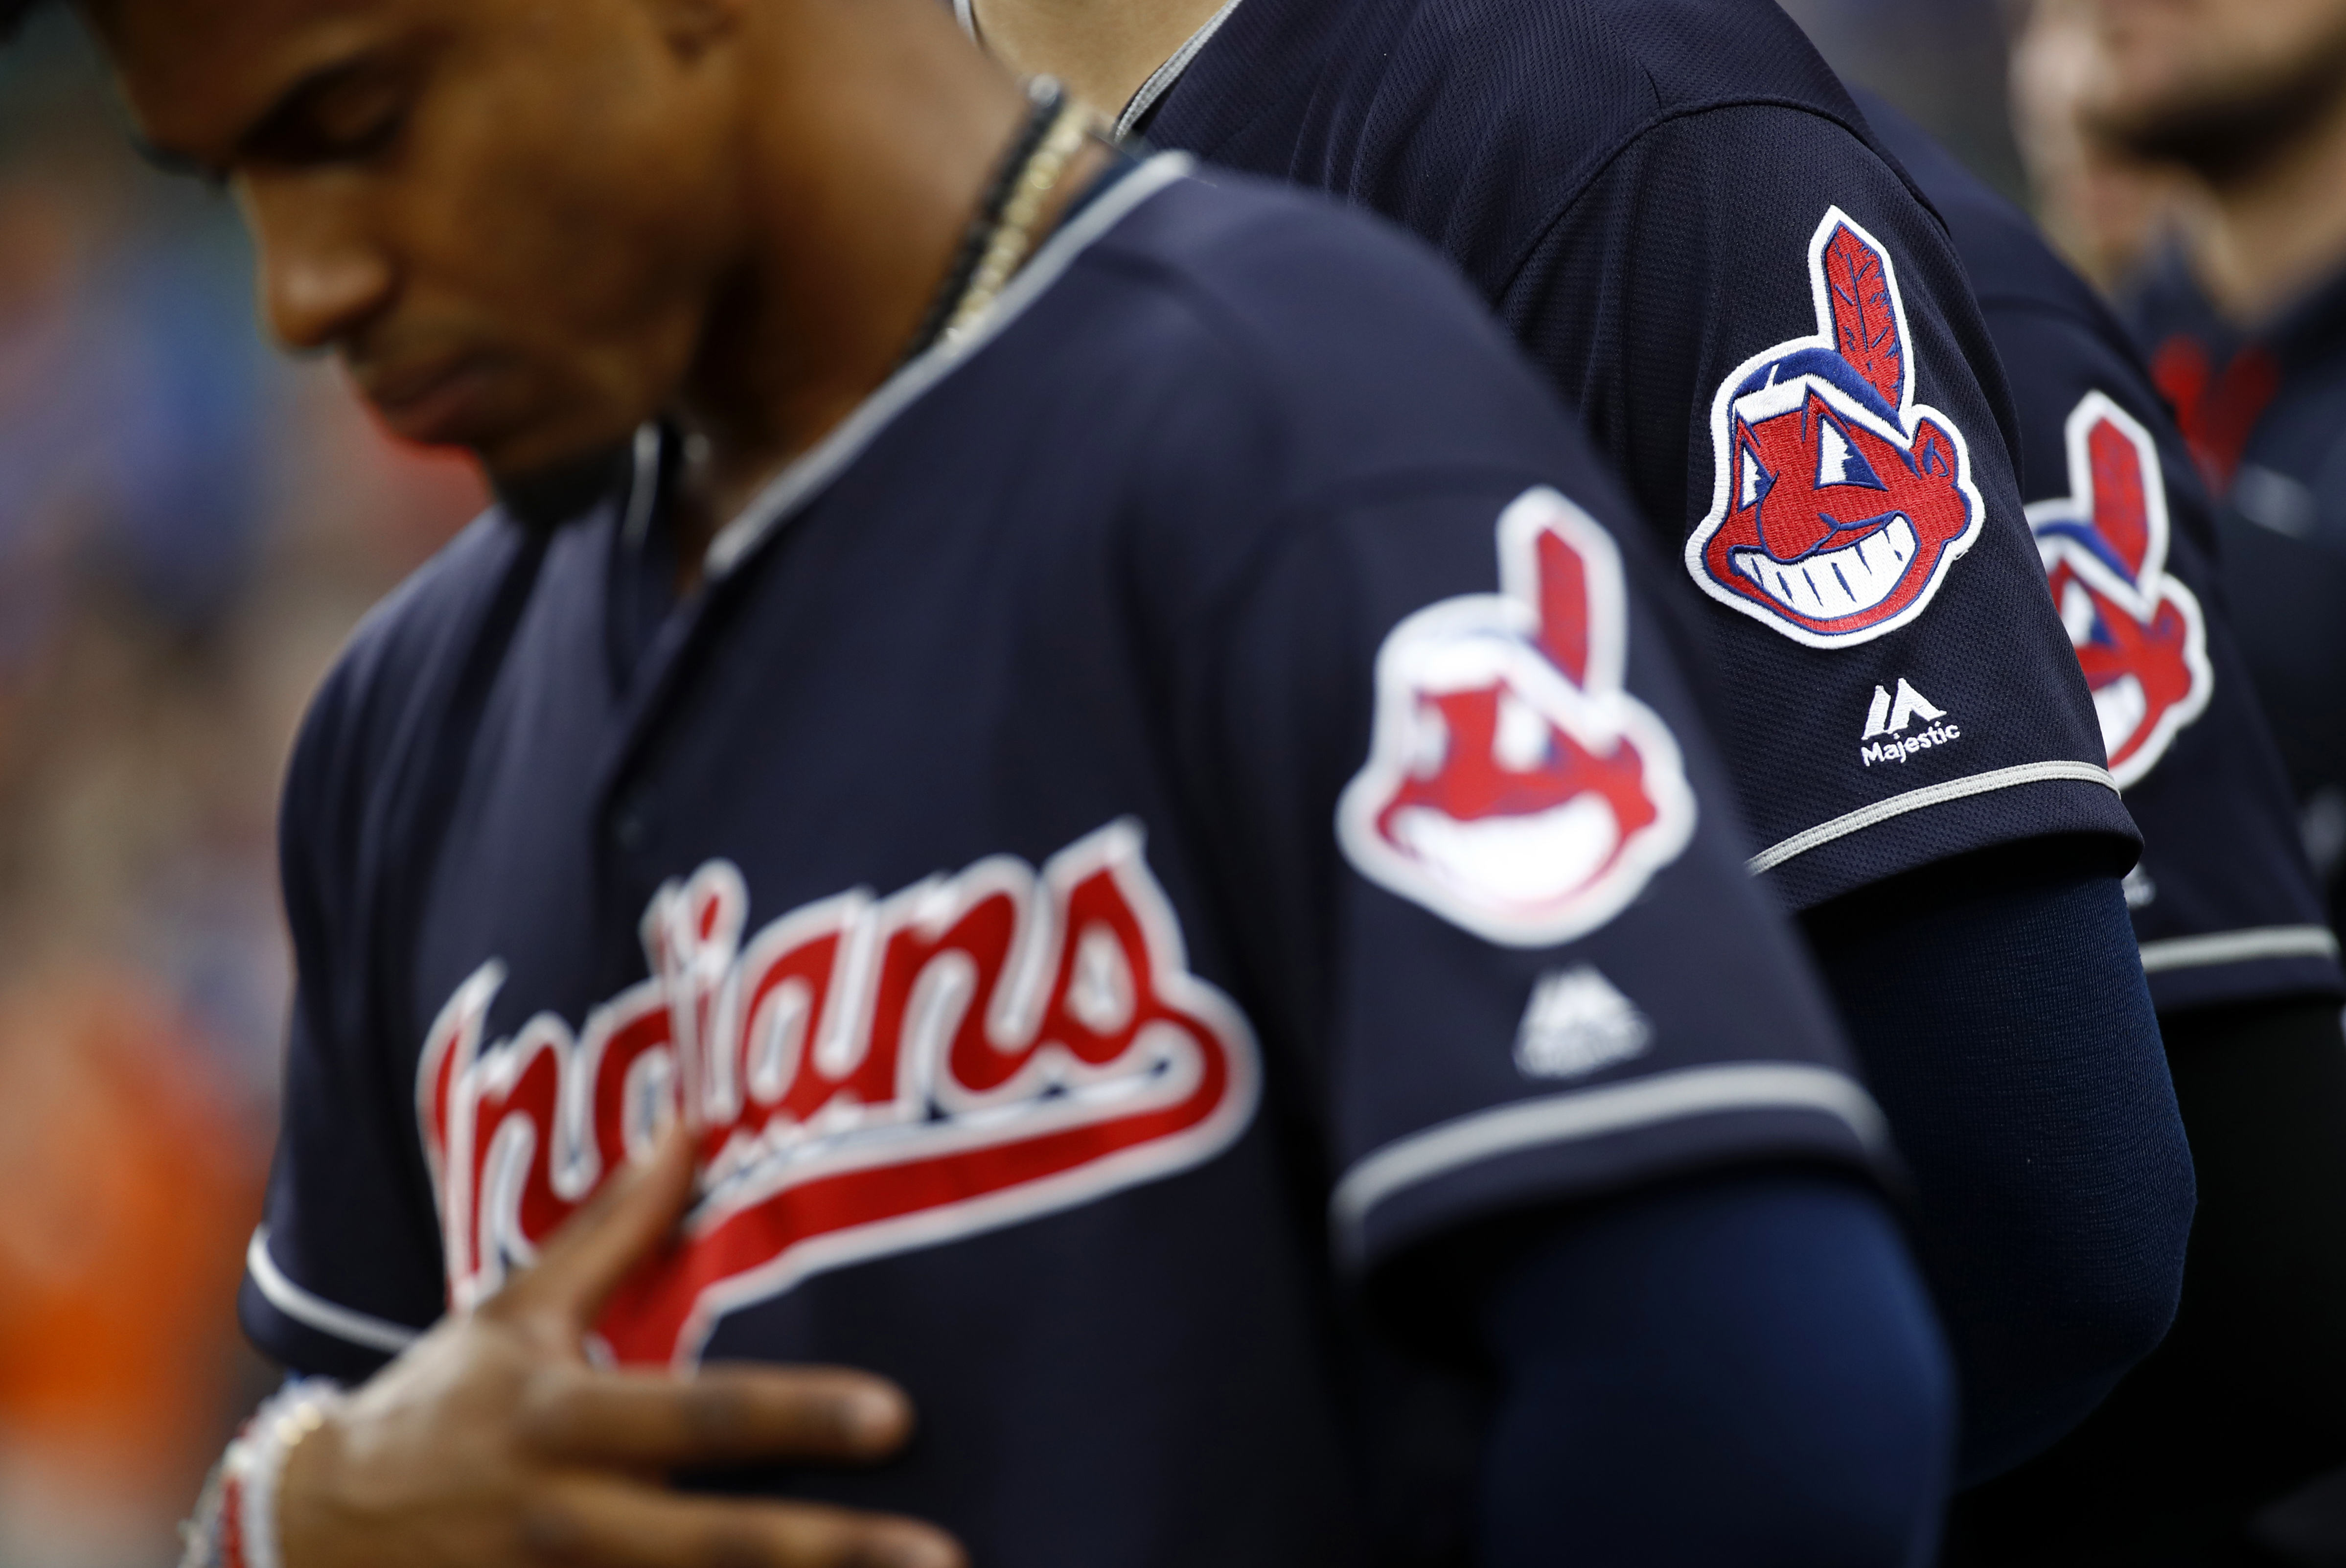 Cleveland Indians to Change Name